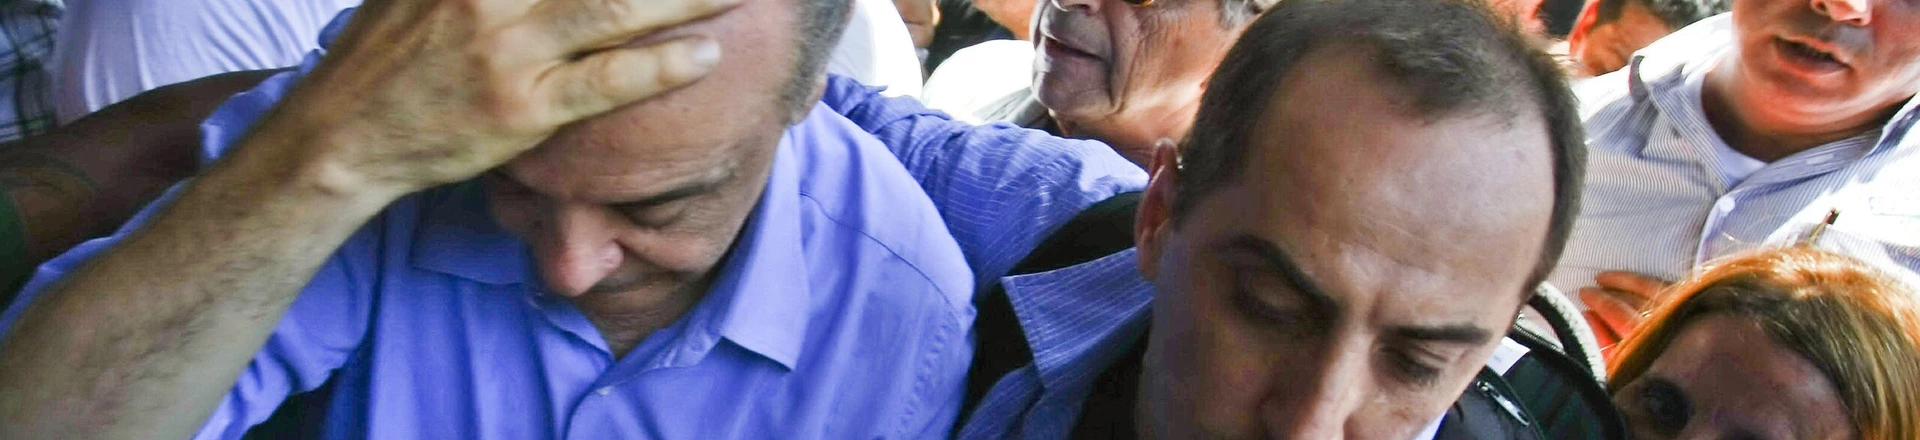 Brazil's presidential candidate Jose Serra (L) of the Social Democratic Party of Brazil protects his head after being "knocked silly" by a thrown object, during a rally in Campo Grande, 55 km from Rio de Janeiro's downtown, on October 20, 2010. Serra and rival Dilma Rousseff of the ruling Workers' Party, will face on October 31 in the run-off election. AFP PHOTO/Cesar Da Silva (Photo credit should read CESAR DA SILVA/AFP/Getty Images)